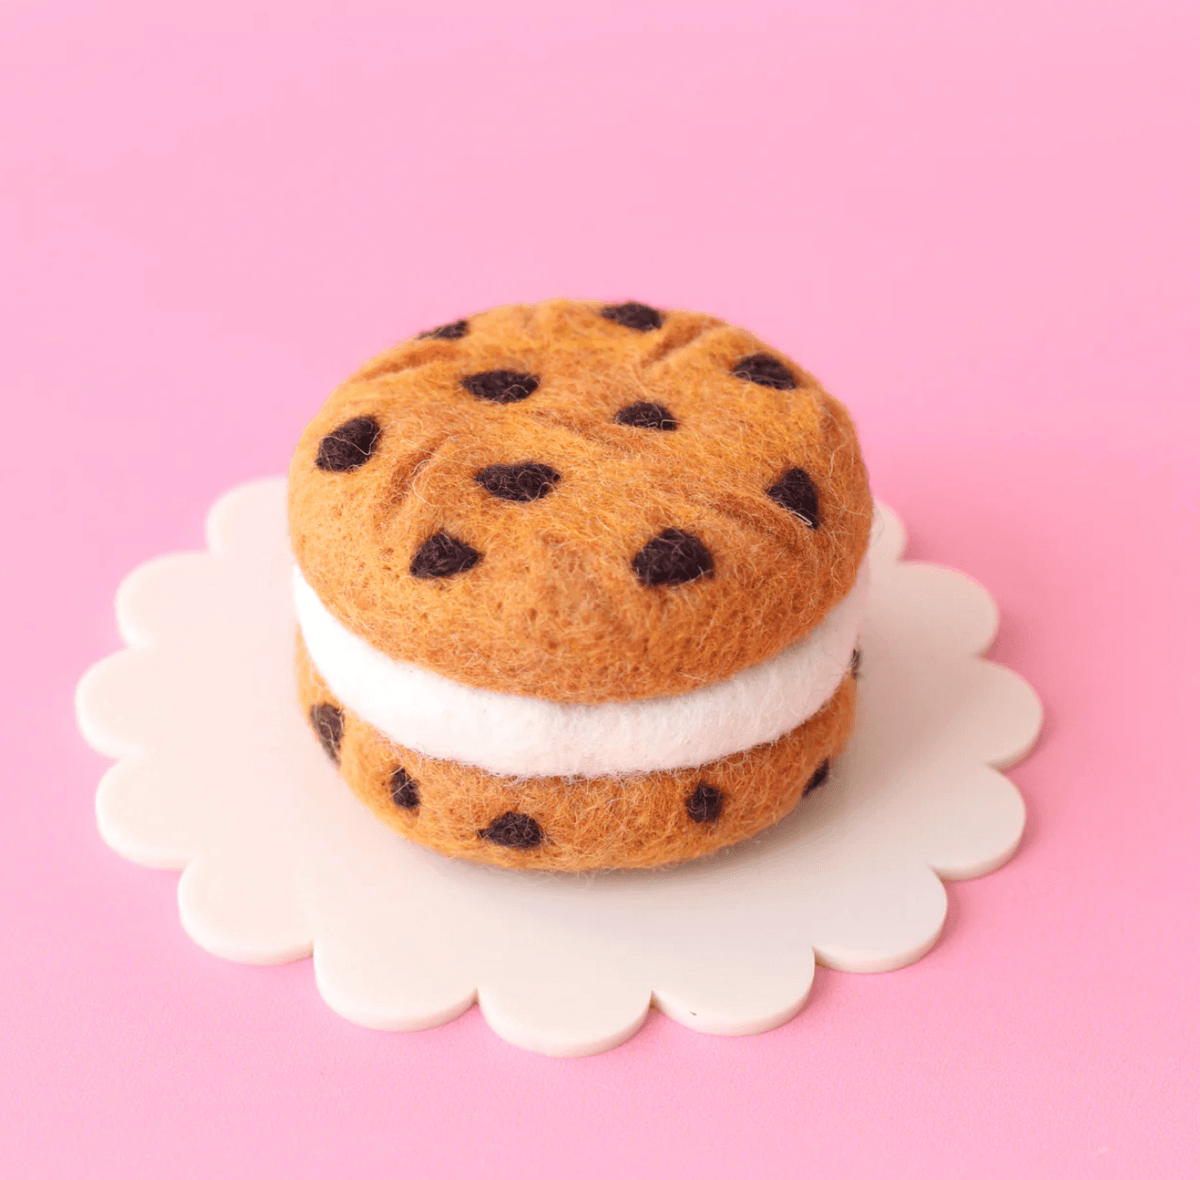 The Curated Parcel - Ice Cream Sandwich 